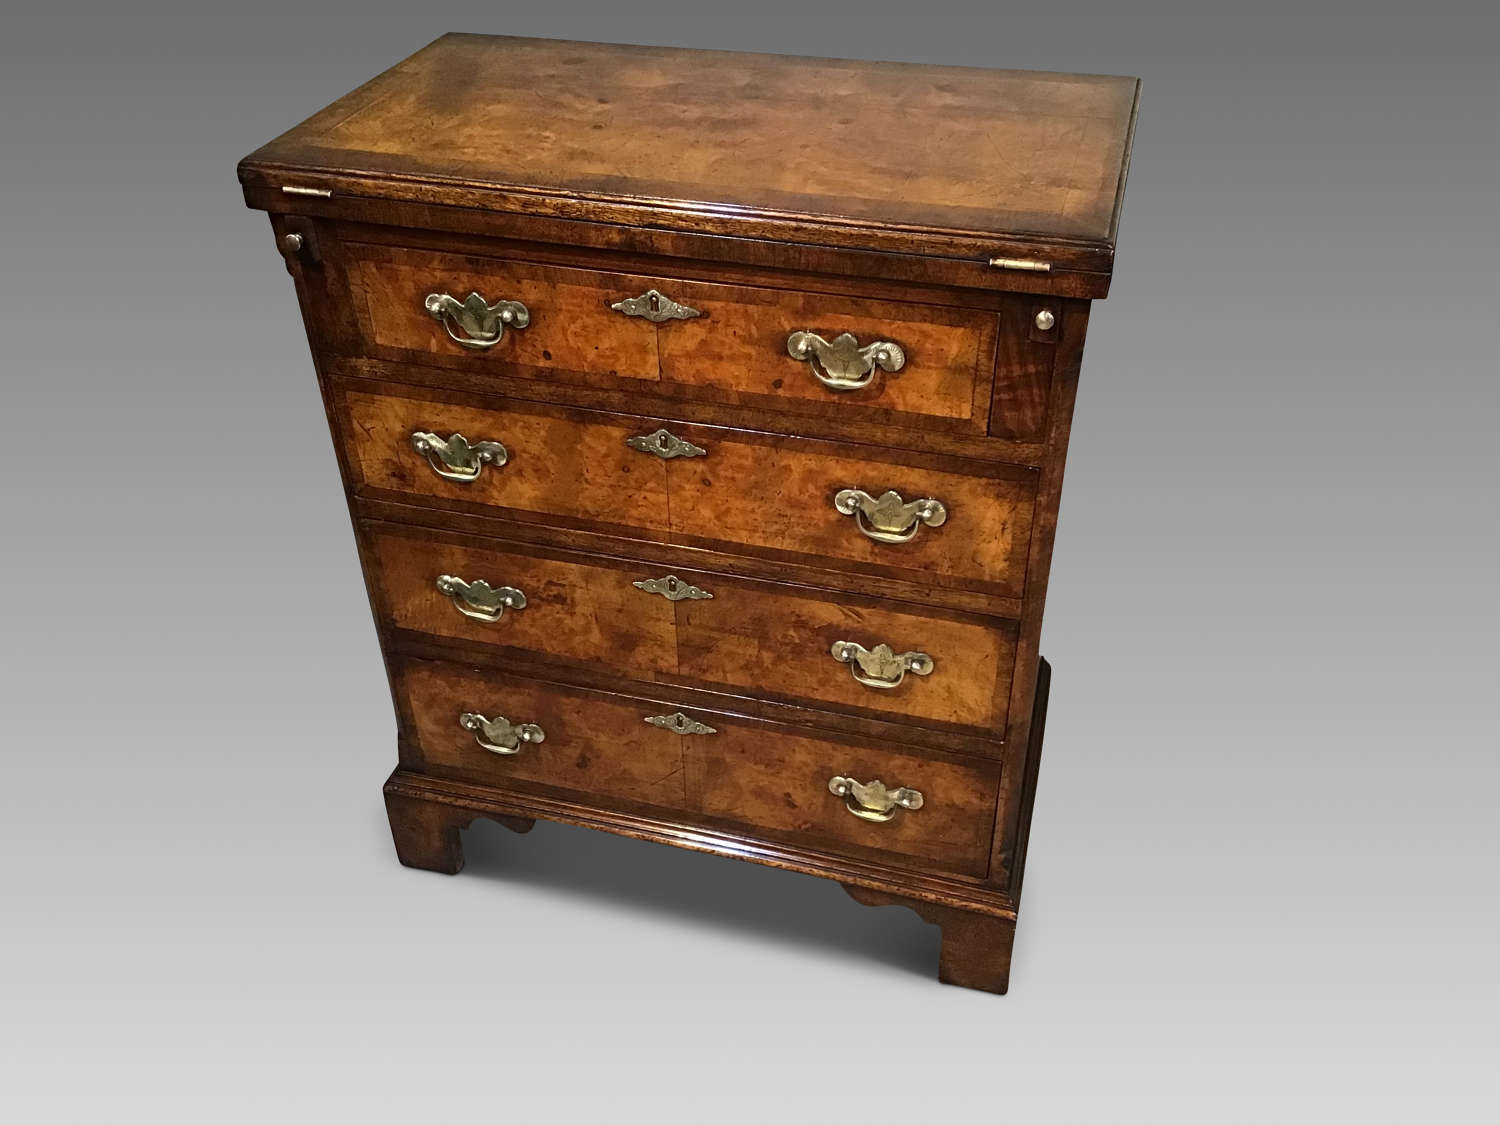 Antique batchelors chest of drawers